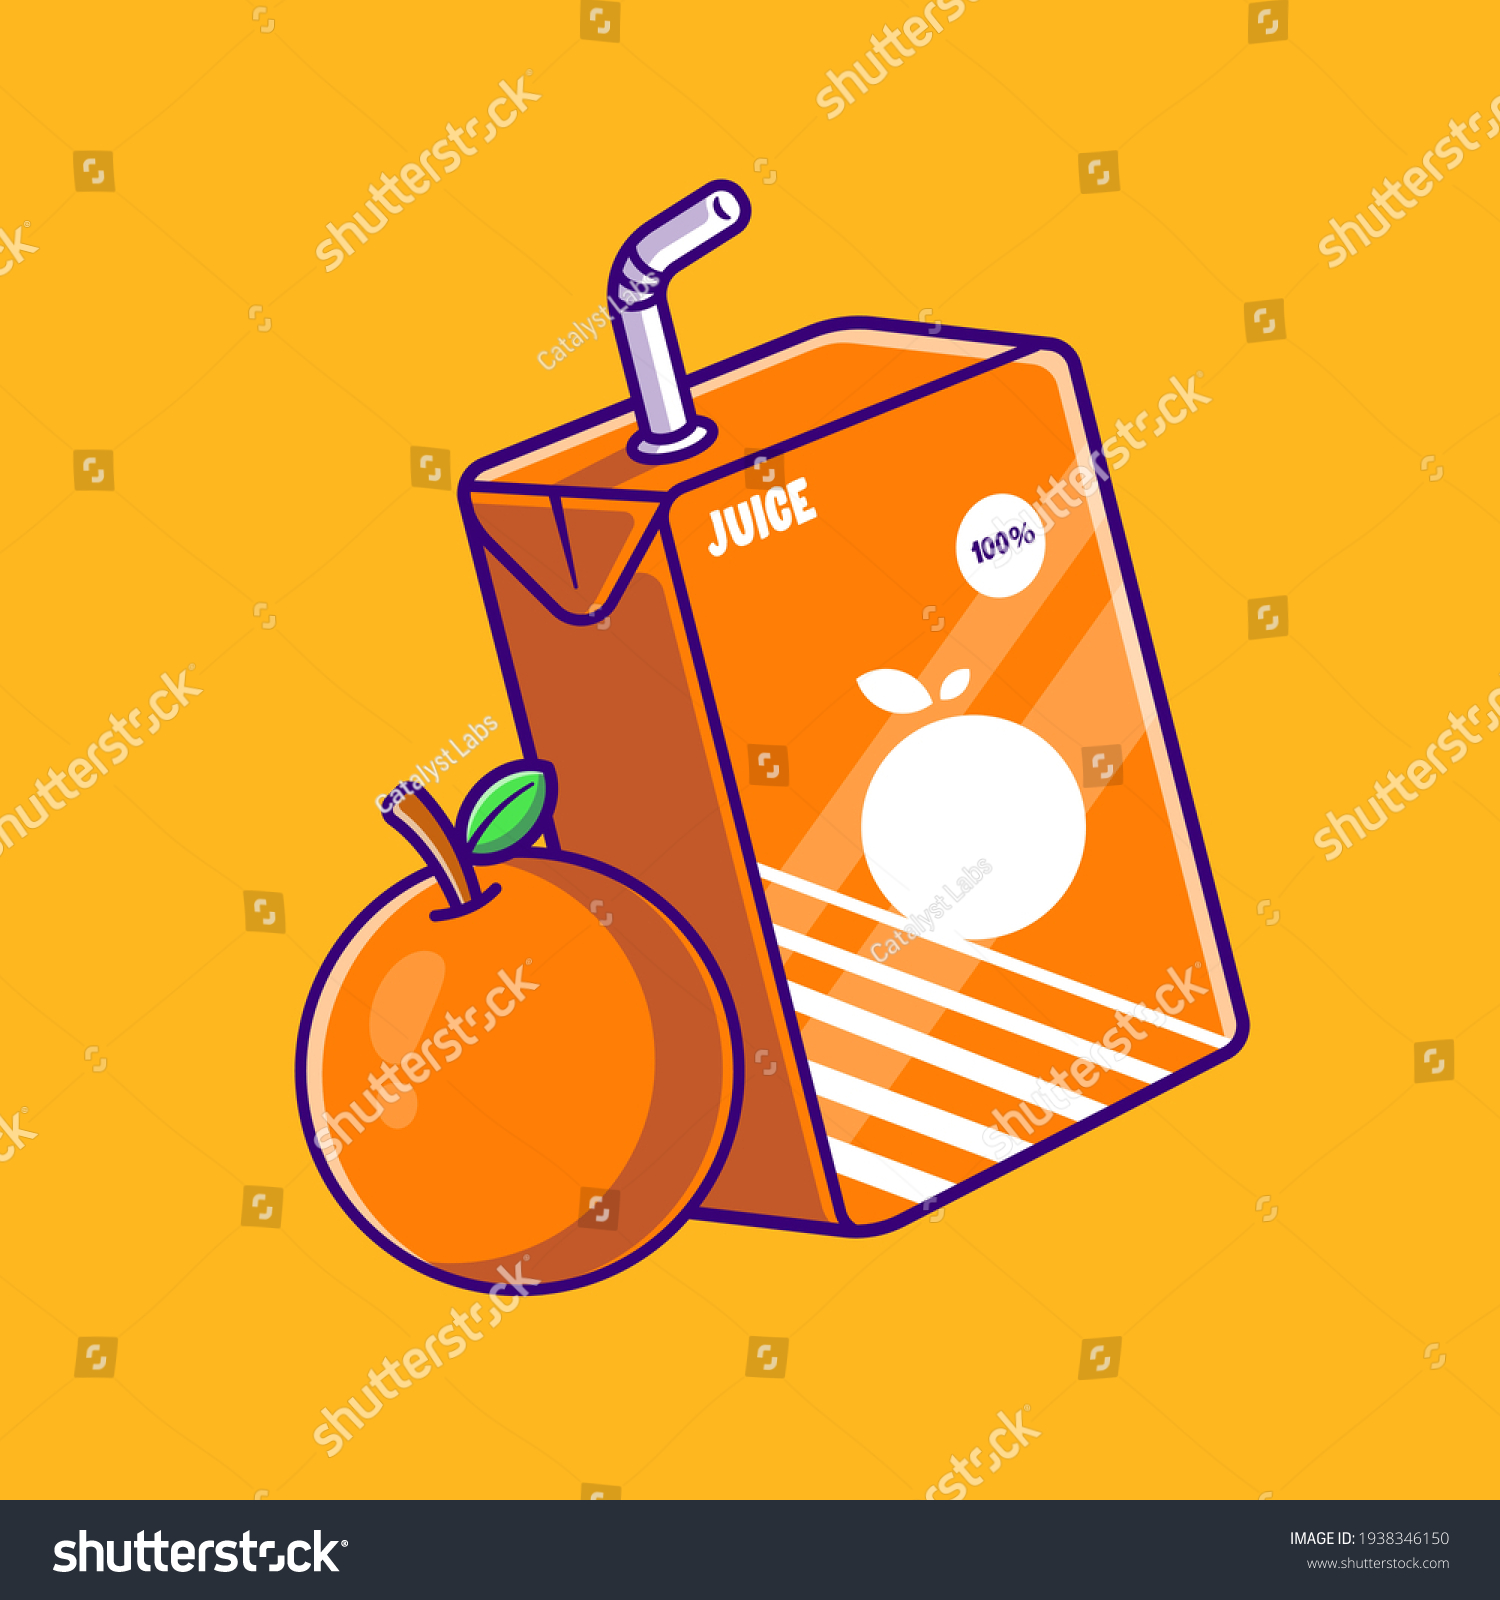 SVG of Orange Juice Box Cartoon Vector Icon Illustration. Food And Drink Icon Concept Isolated Premium Vector. Flat Cartoon Style svg